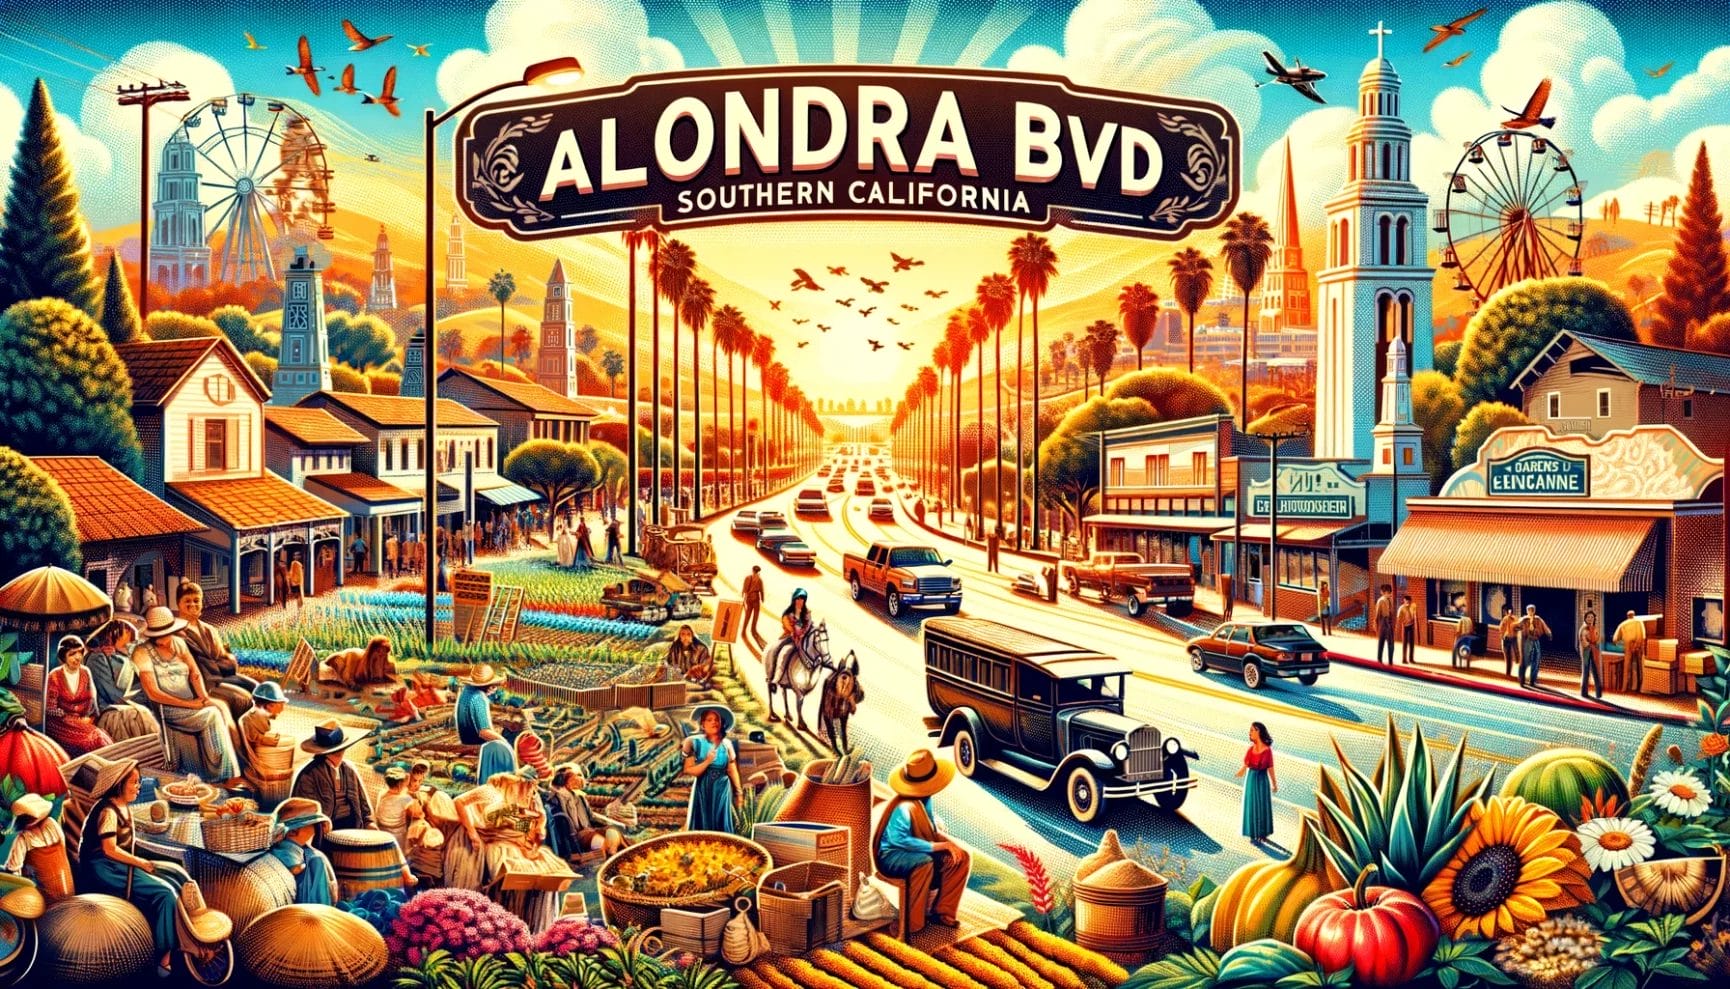 A vibrant, detailed illustration depicting a bustling street scene on alondra boulevard in southern california, featuring local culture, architecture, and life.